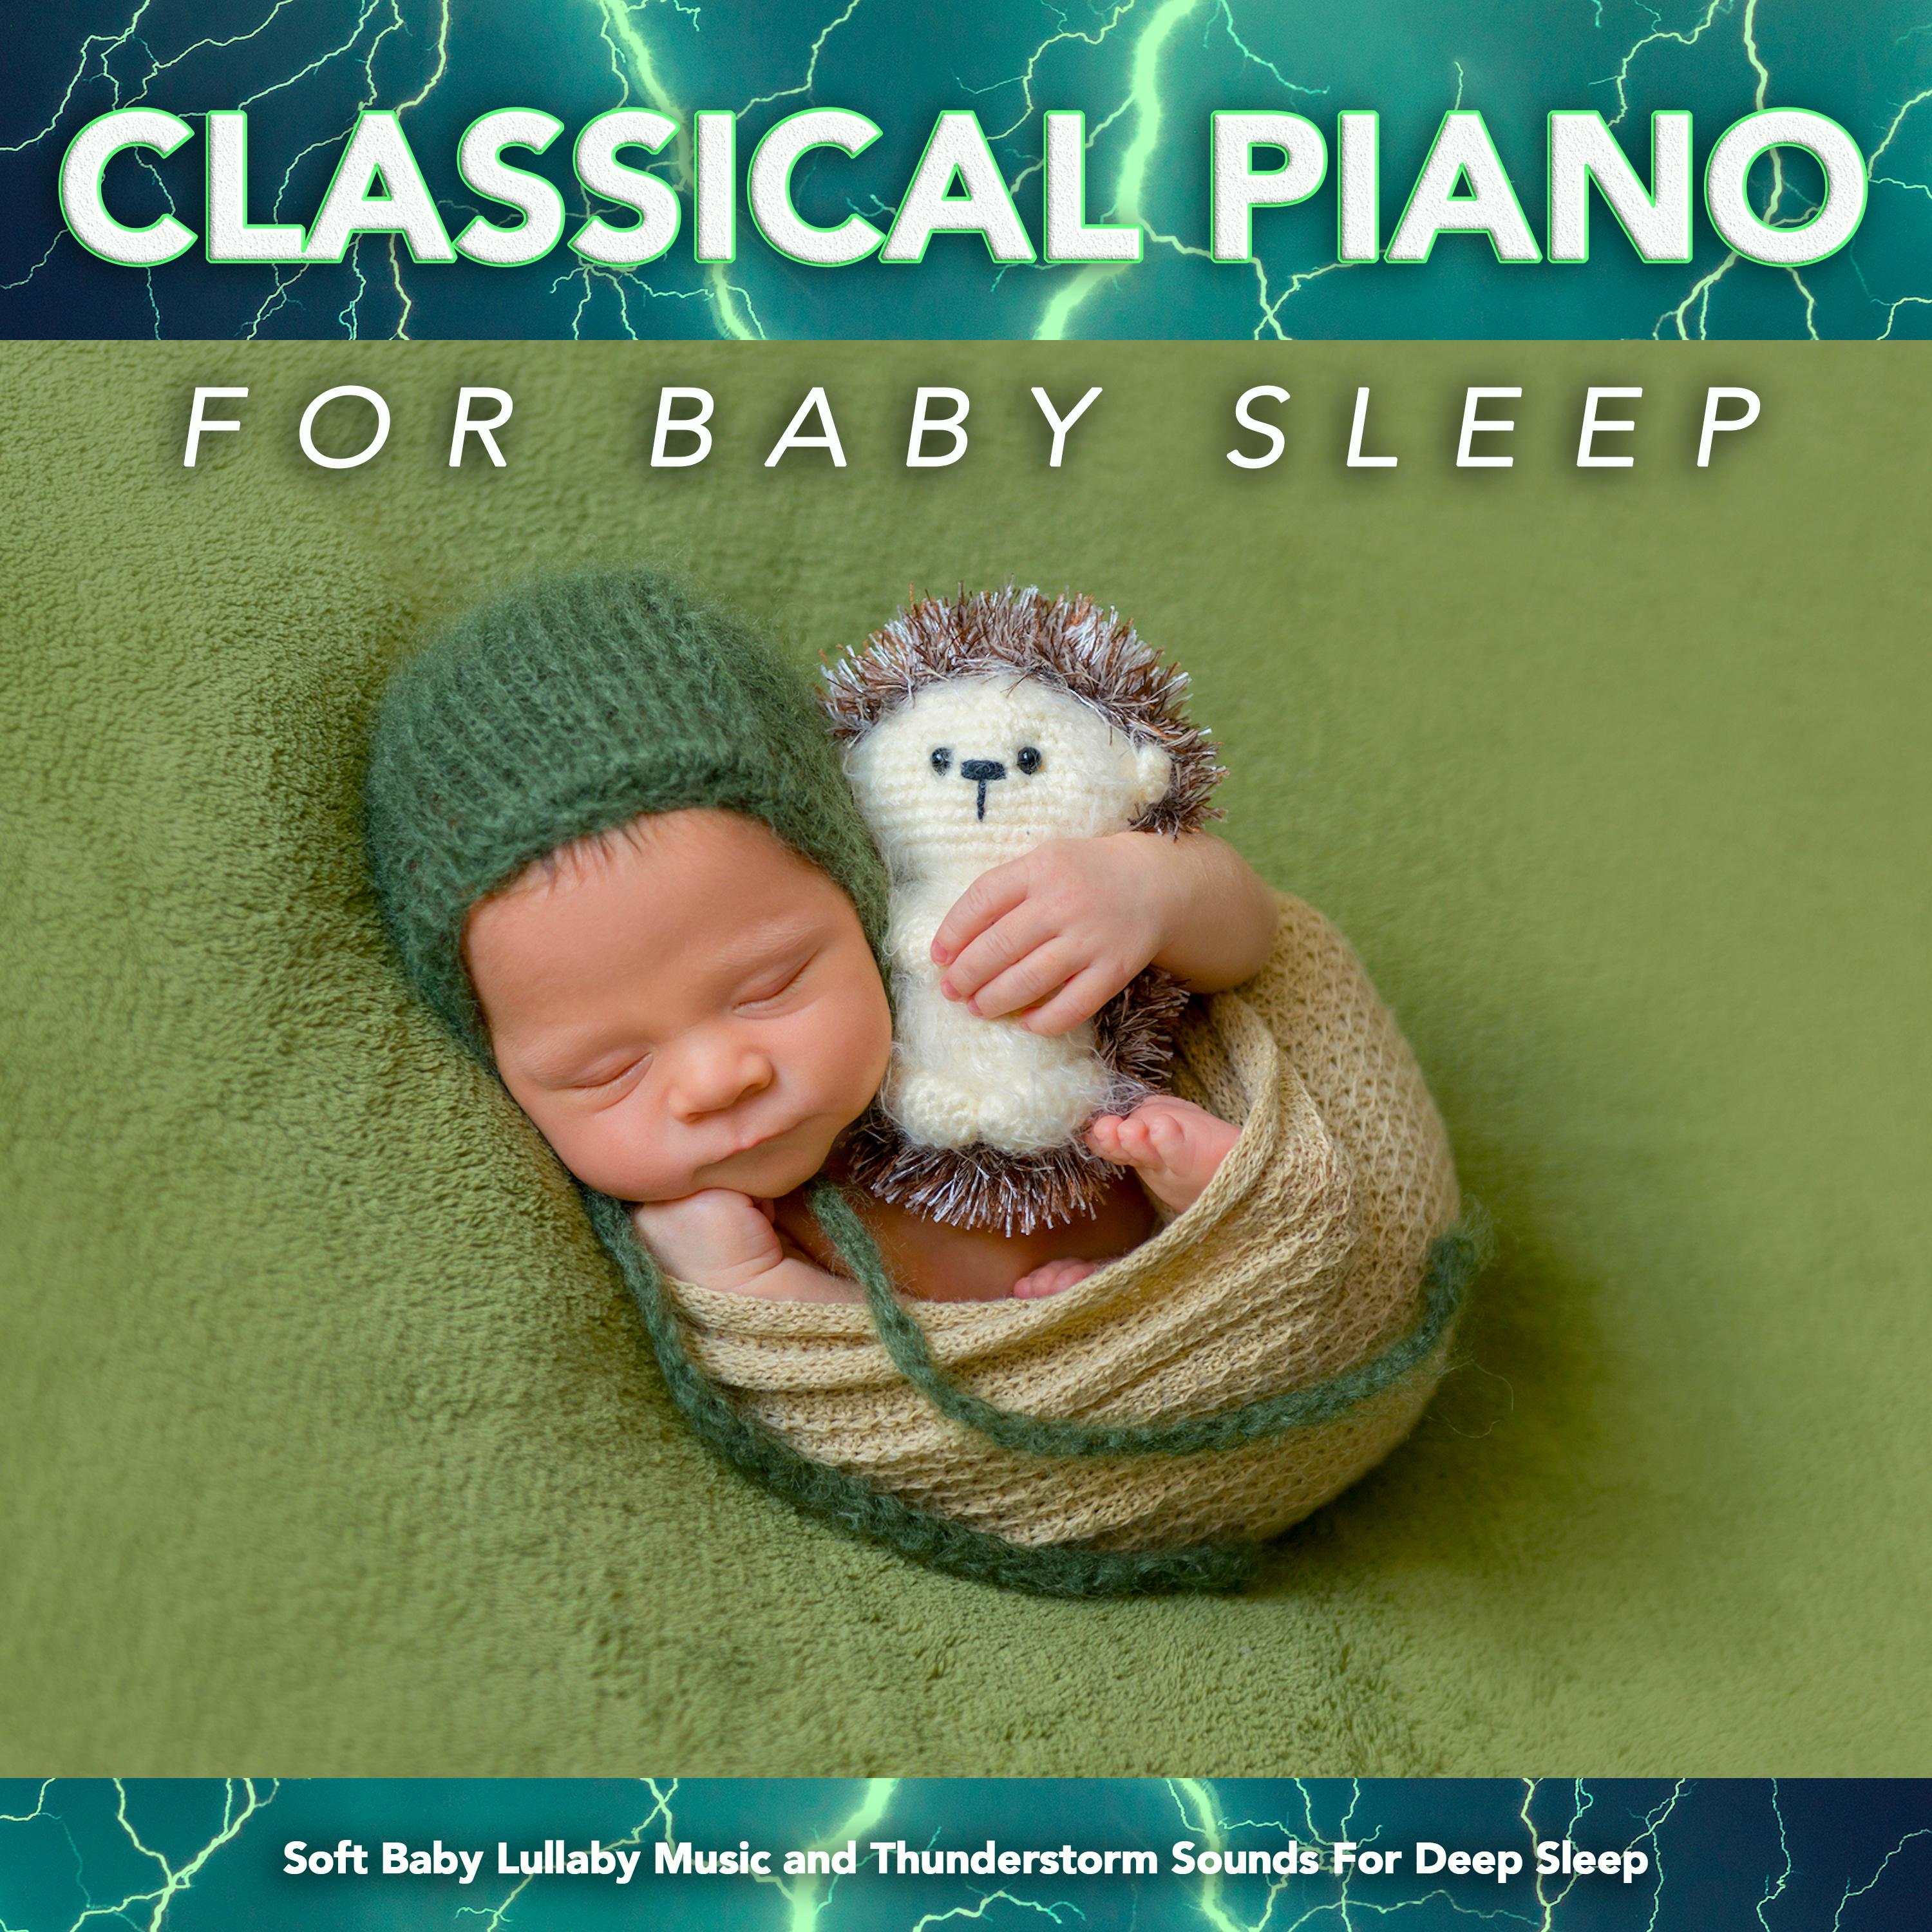 Piano Sonata Mozart - Soft Baby Lullaby Music - Thunderstorm Sounds - Classical Piano for Baby Sleep